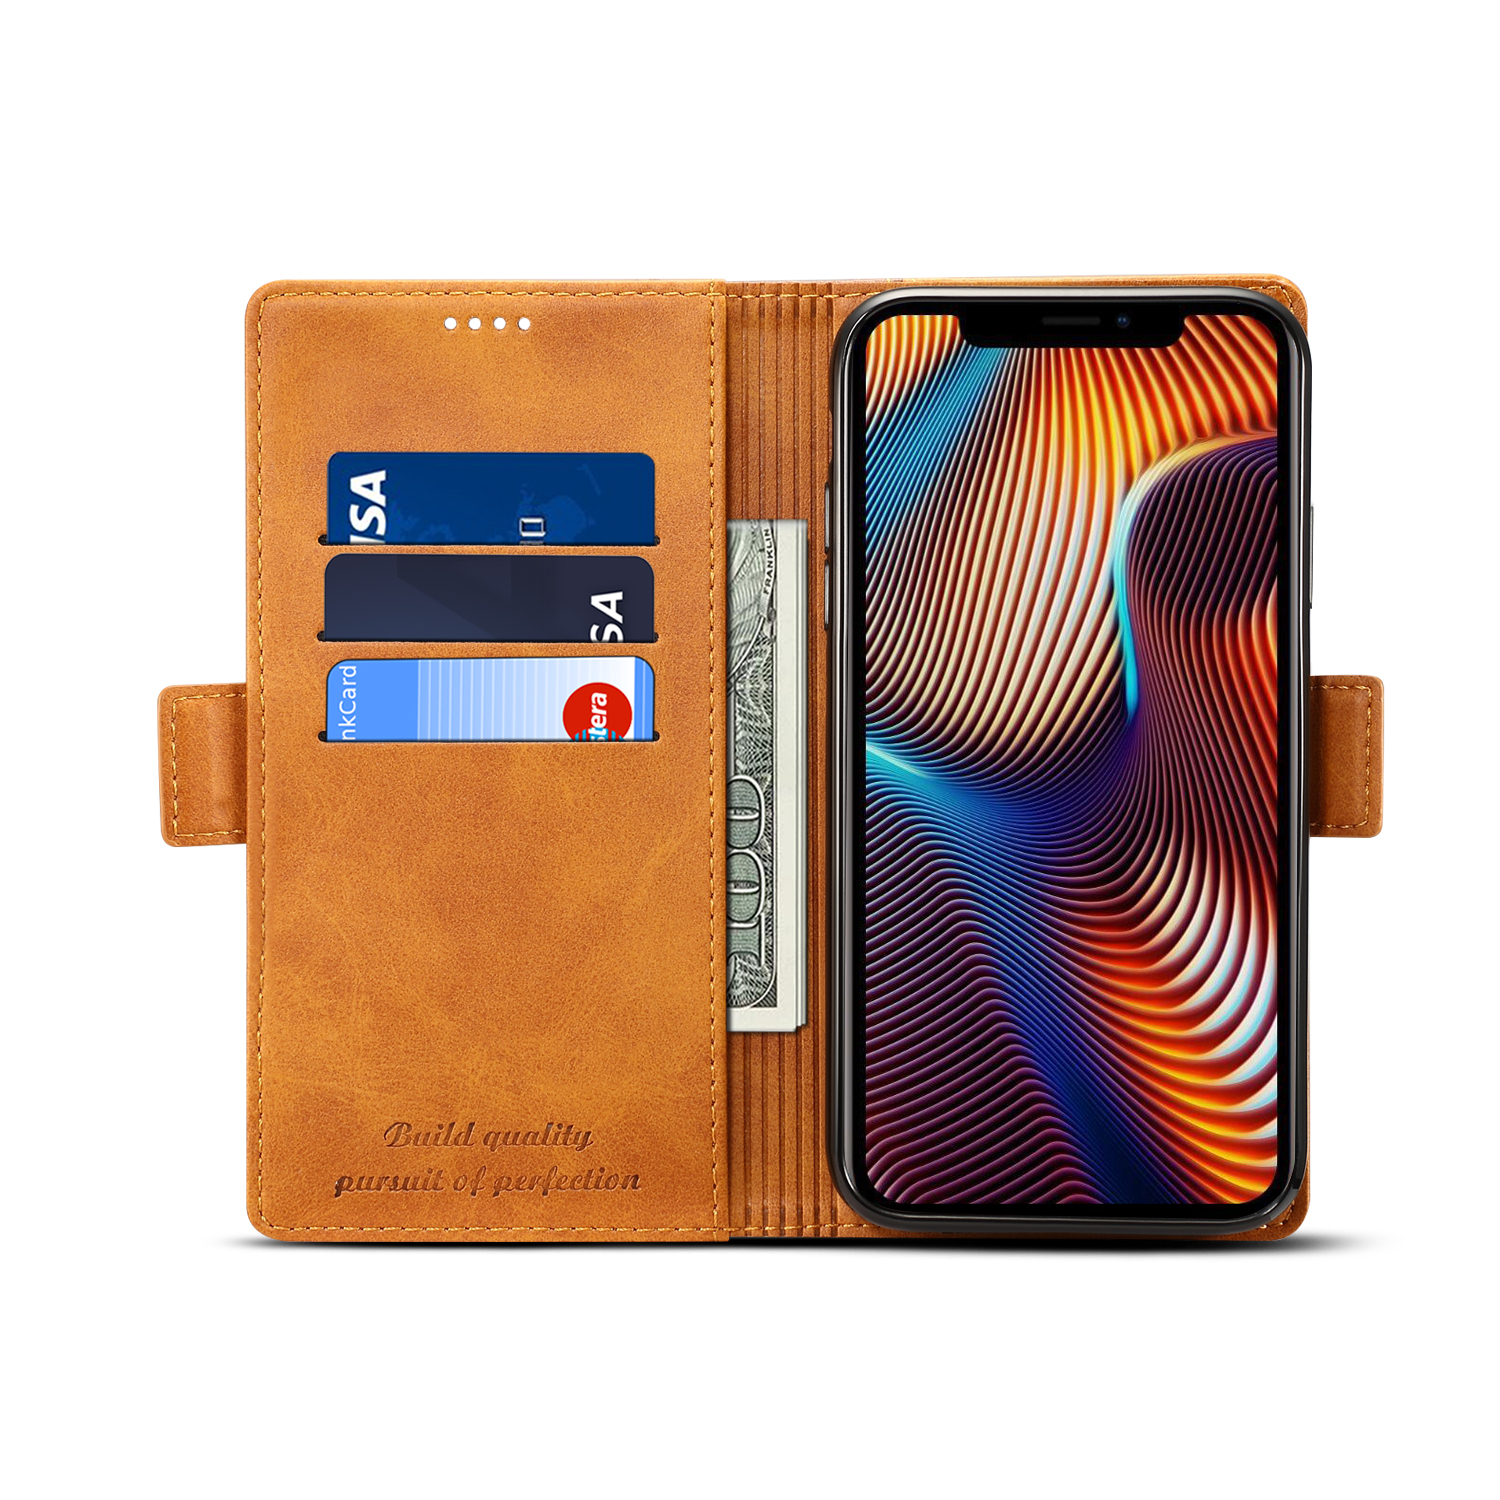 Bakeey-Hybrid-Color-Wallet-Card-Sots-Kickstand-Protective-Case-For-iPhone-XS-Max-1380935